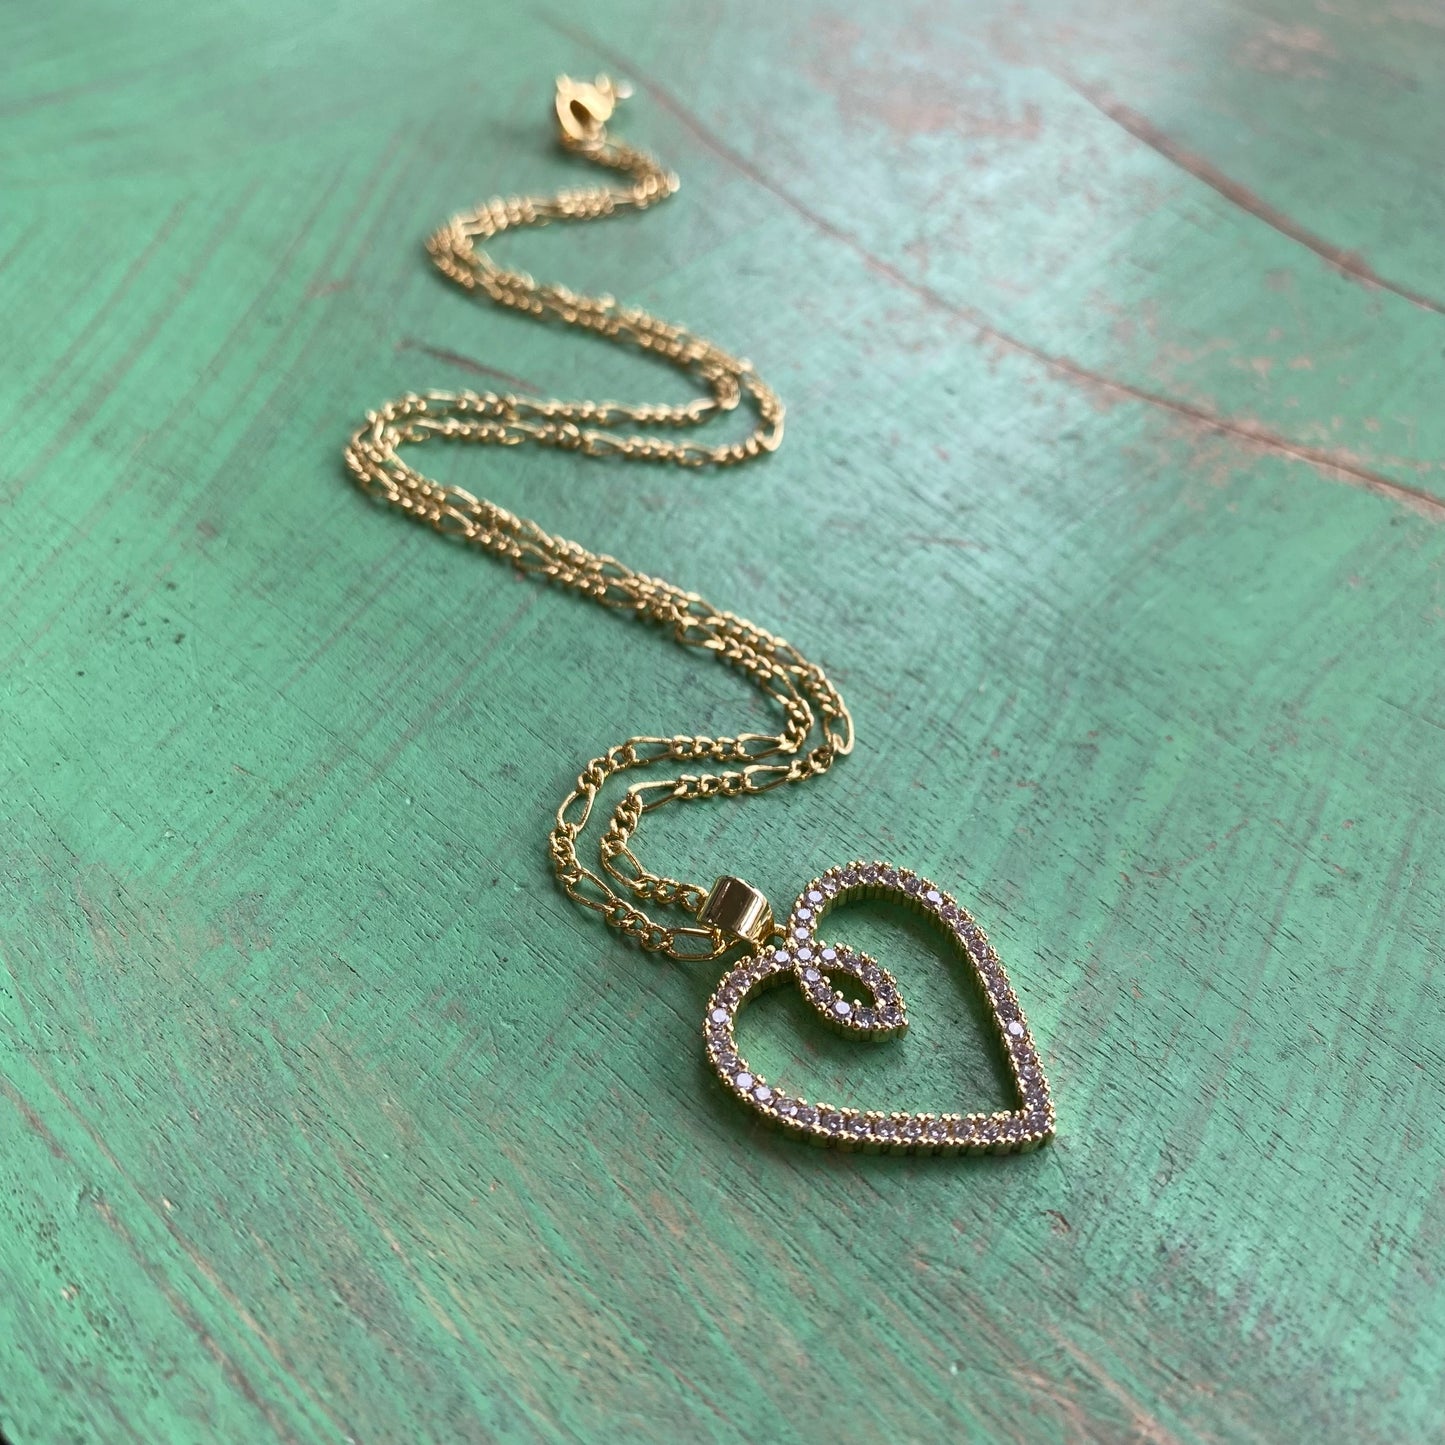 In My Heart Necklace